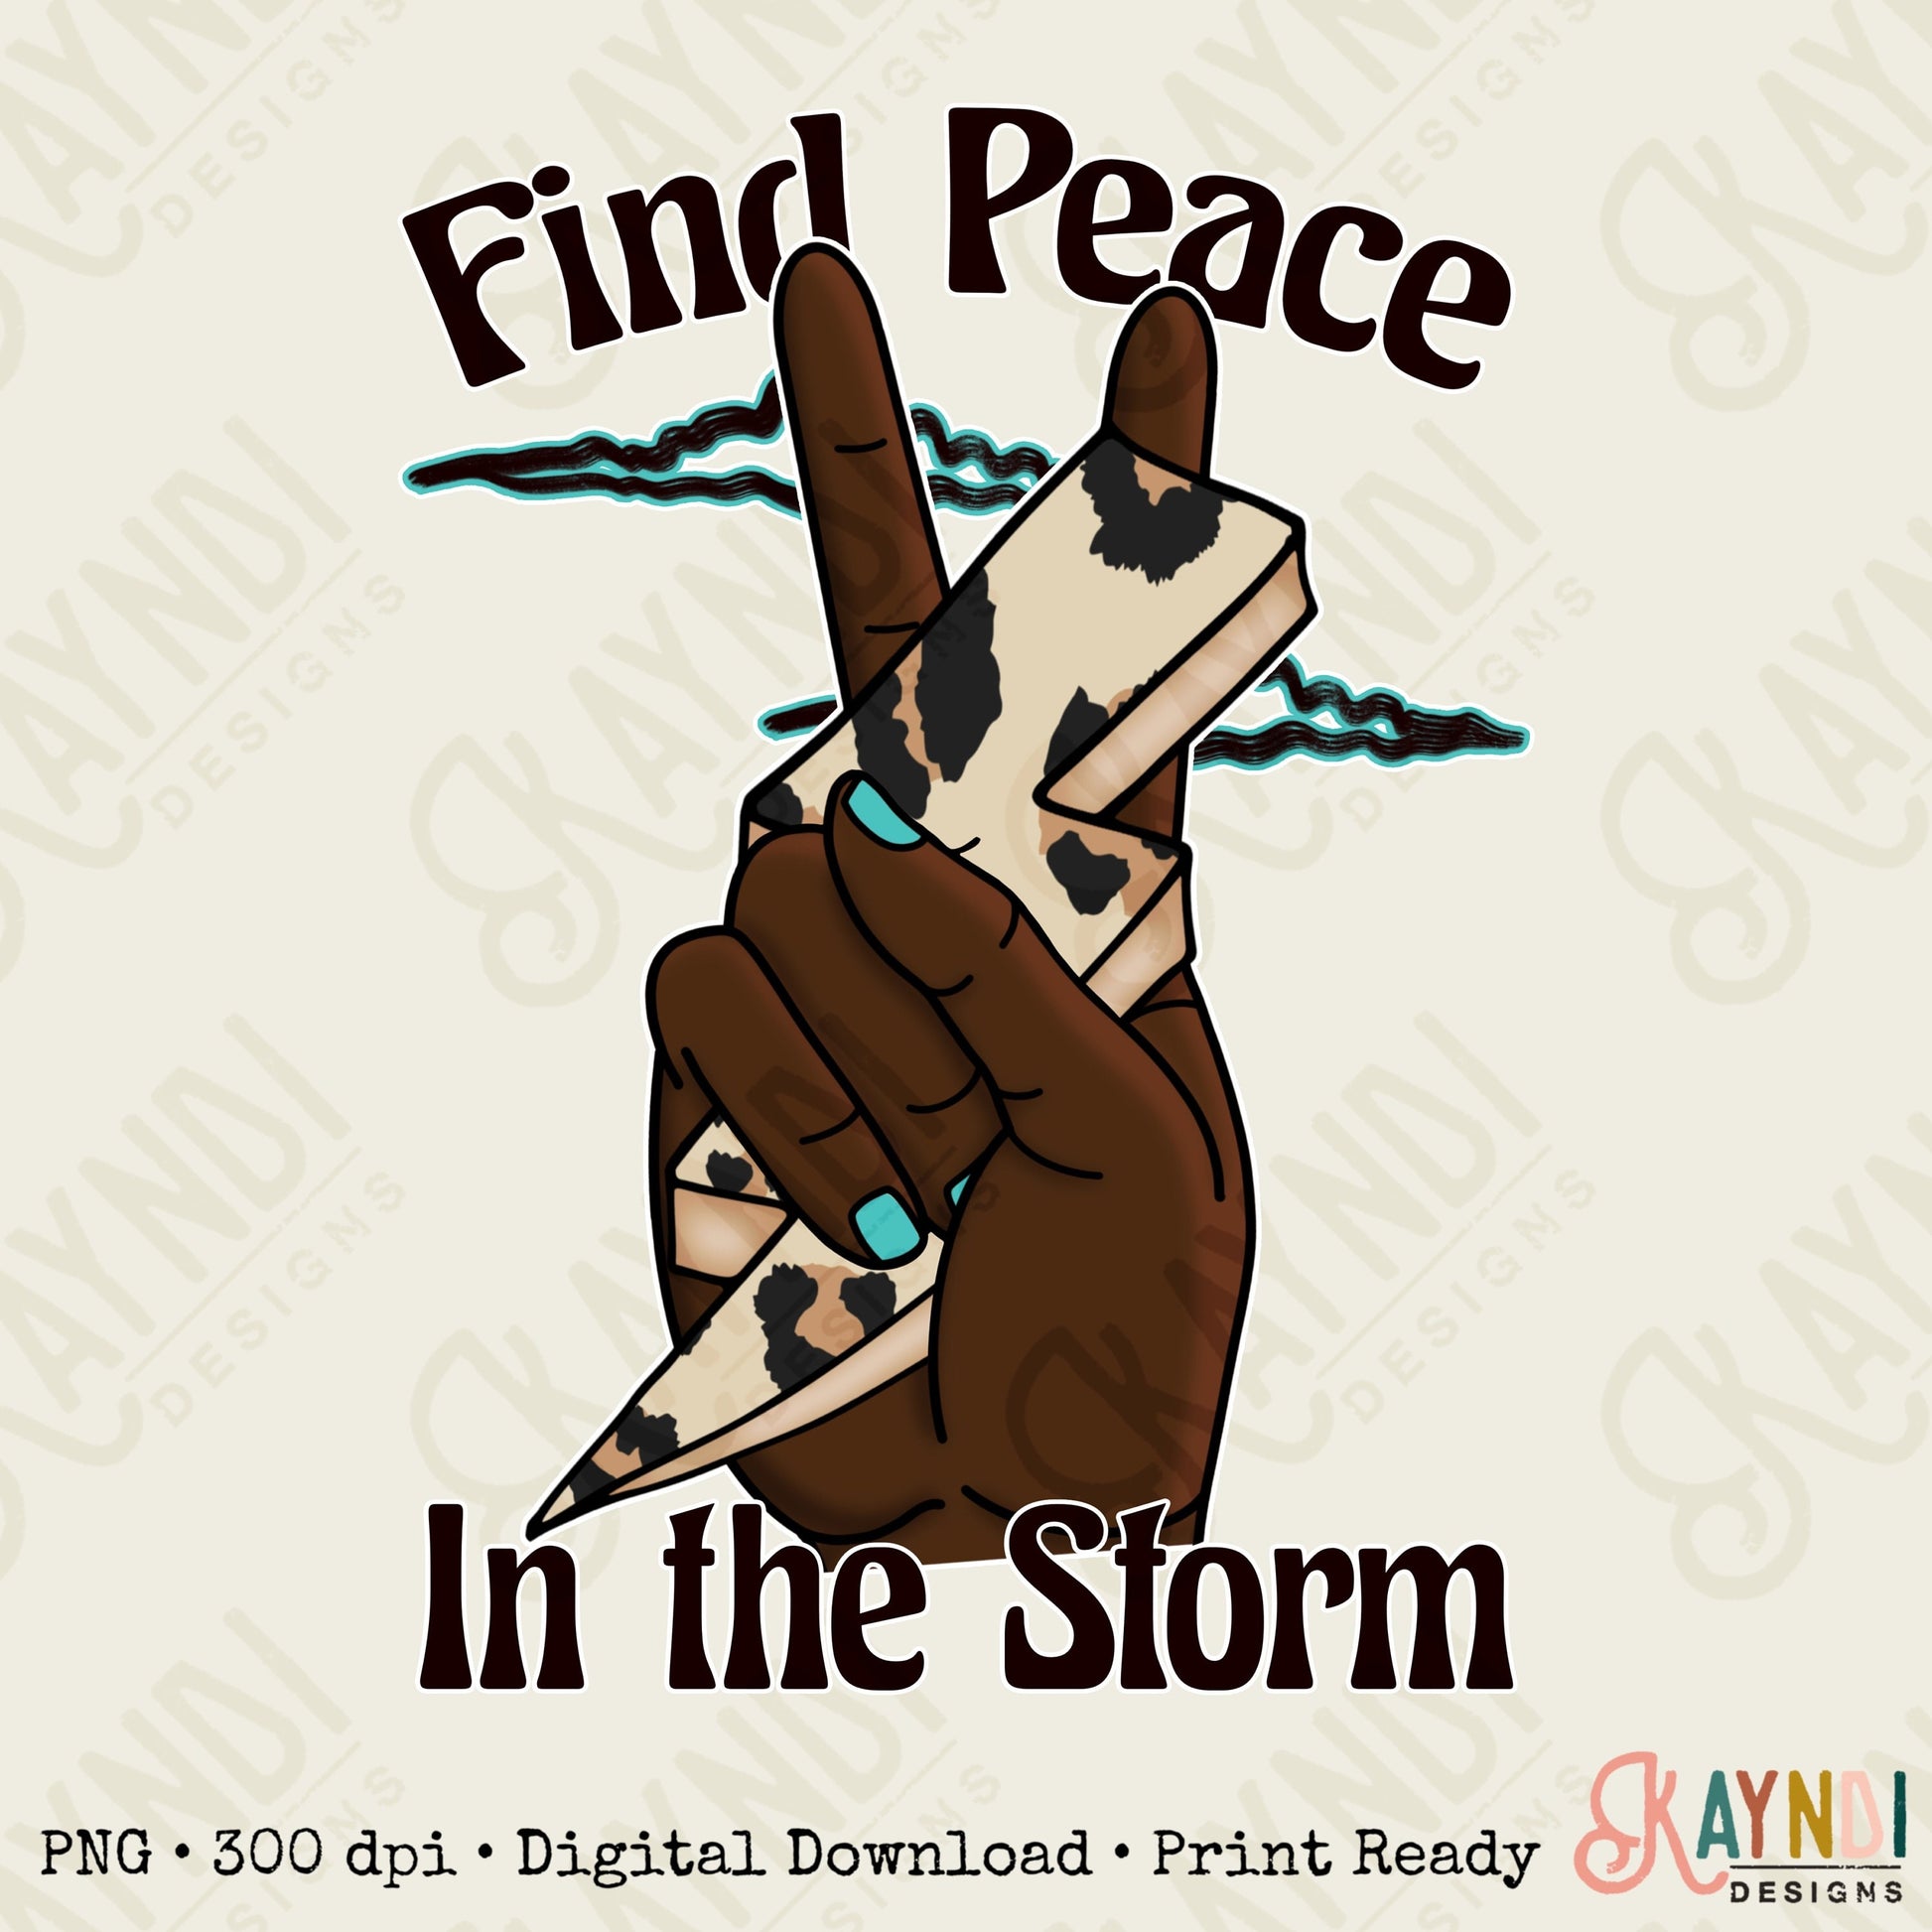 Find Peace in the Storm Sublimation Design PNG Digital Download Printable Mental Health Quote Peace Sign Hand Lightning Bolt Leopard 1